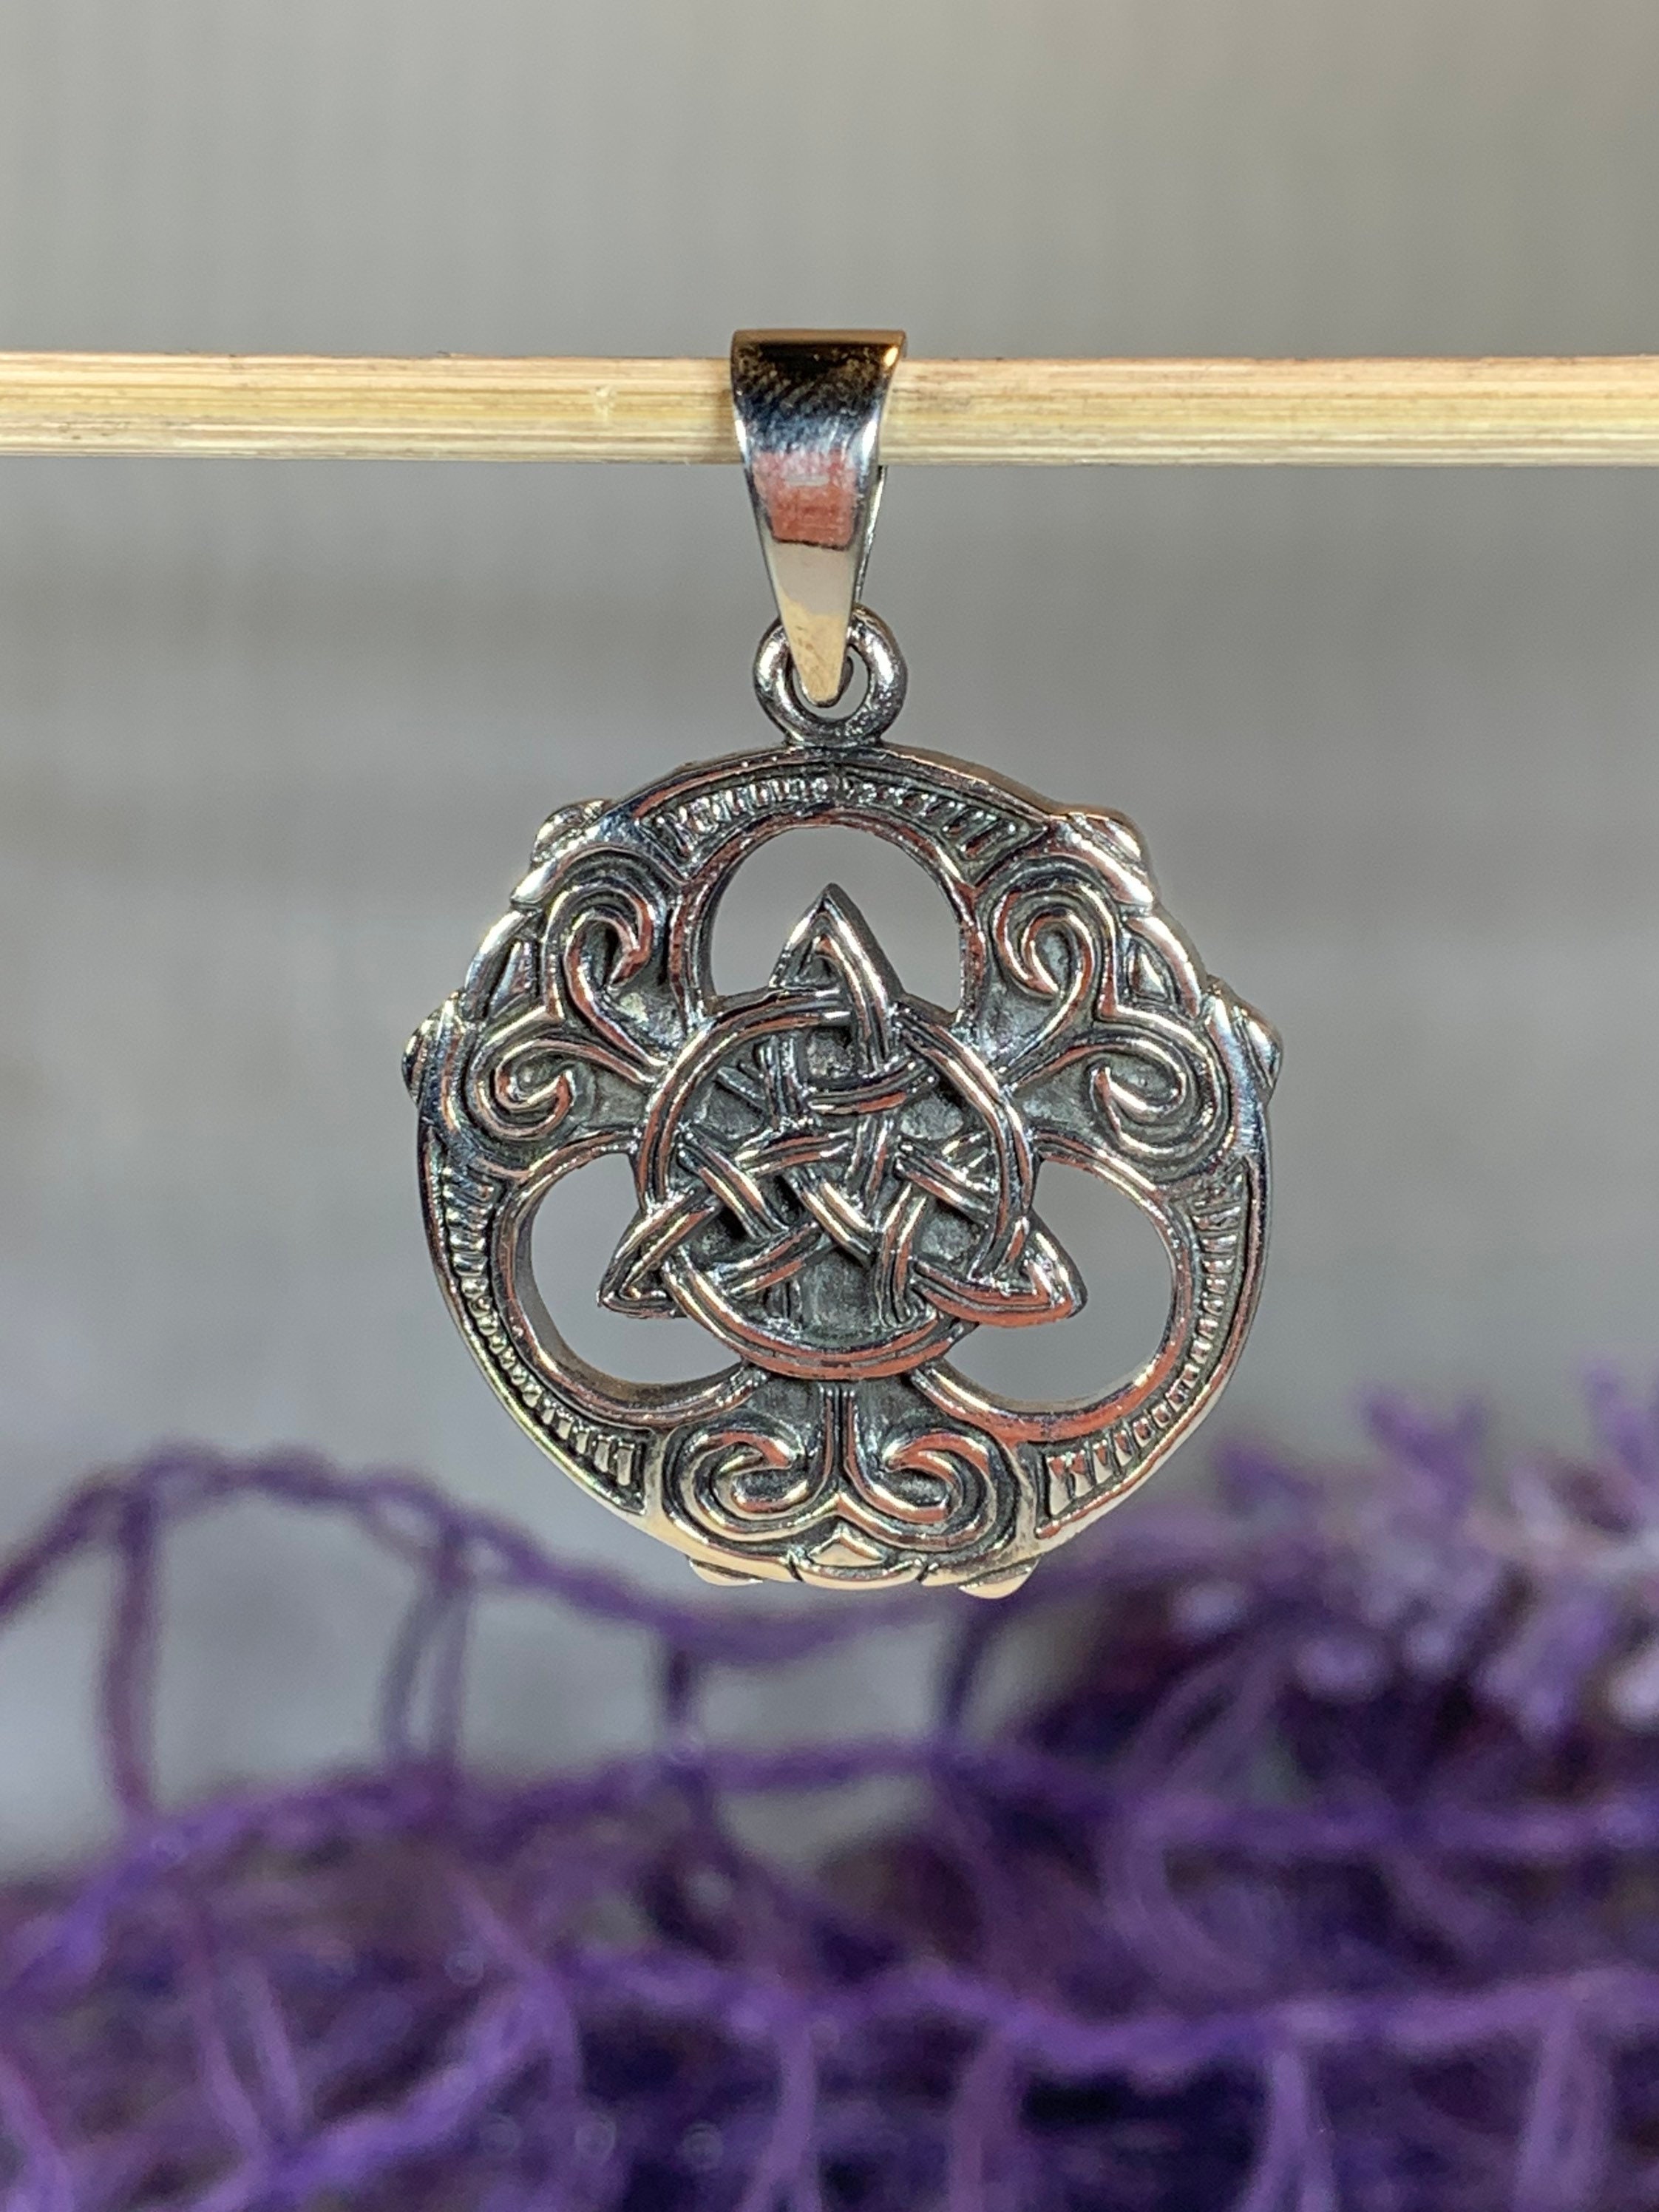 Viking Trinity Knot Necklace, Celtic Jewelry, Norse Jewelry, Pagan ...